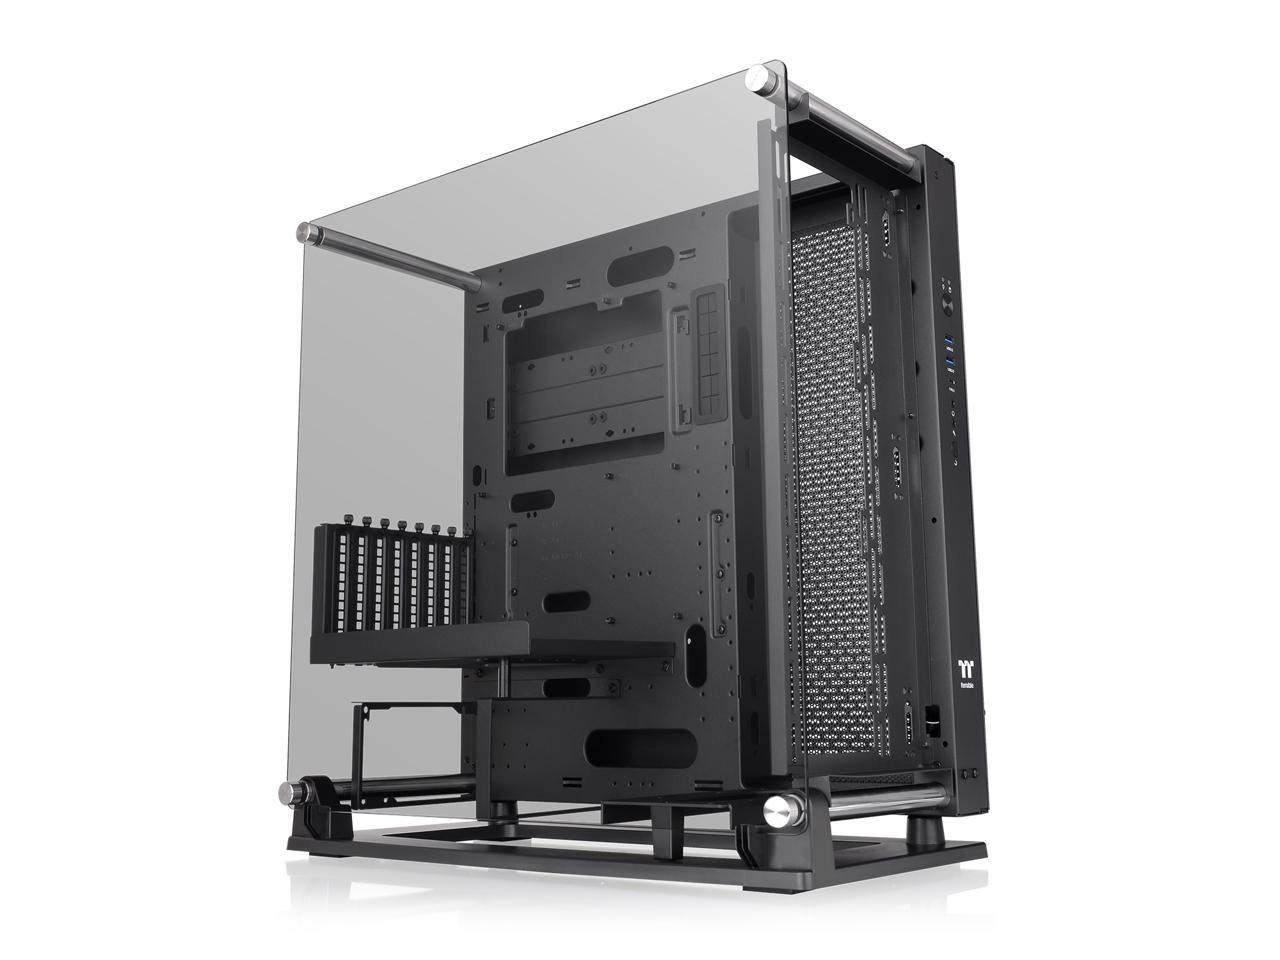 thermaltake core p3 pro e-atx tempered glass mid tower gaming computer chassis, open frame panoramic viewing, glass wall-moun